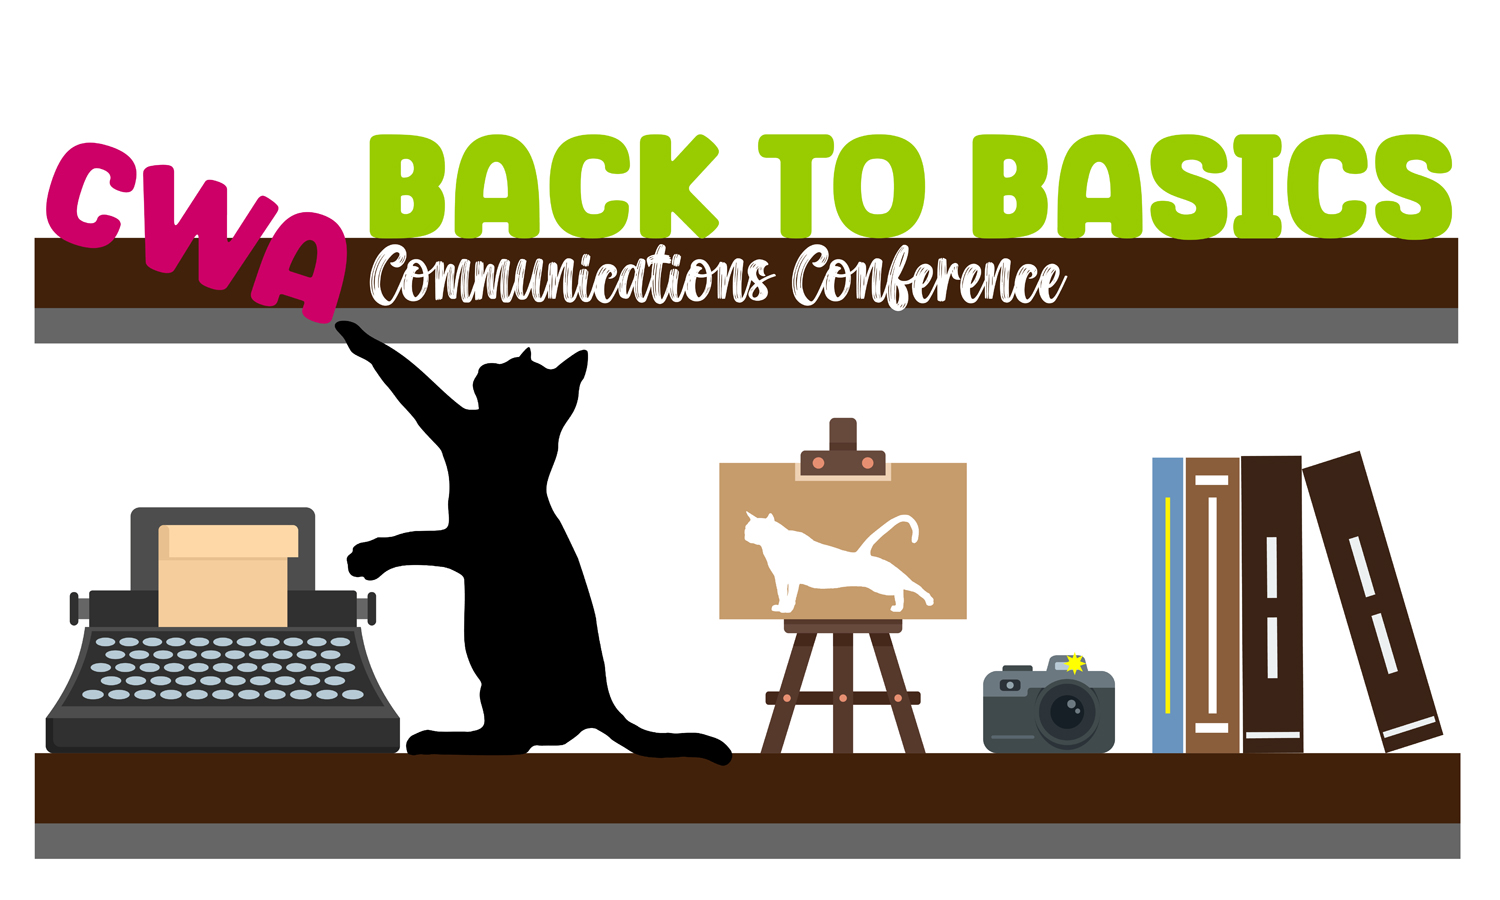 CWA conference back to basics graphic with black cat surrounded by typewriter, easel, camera and books